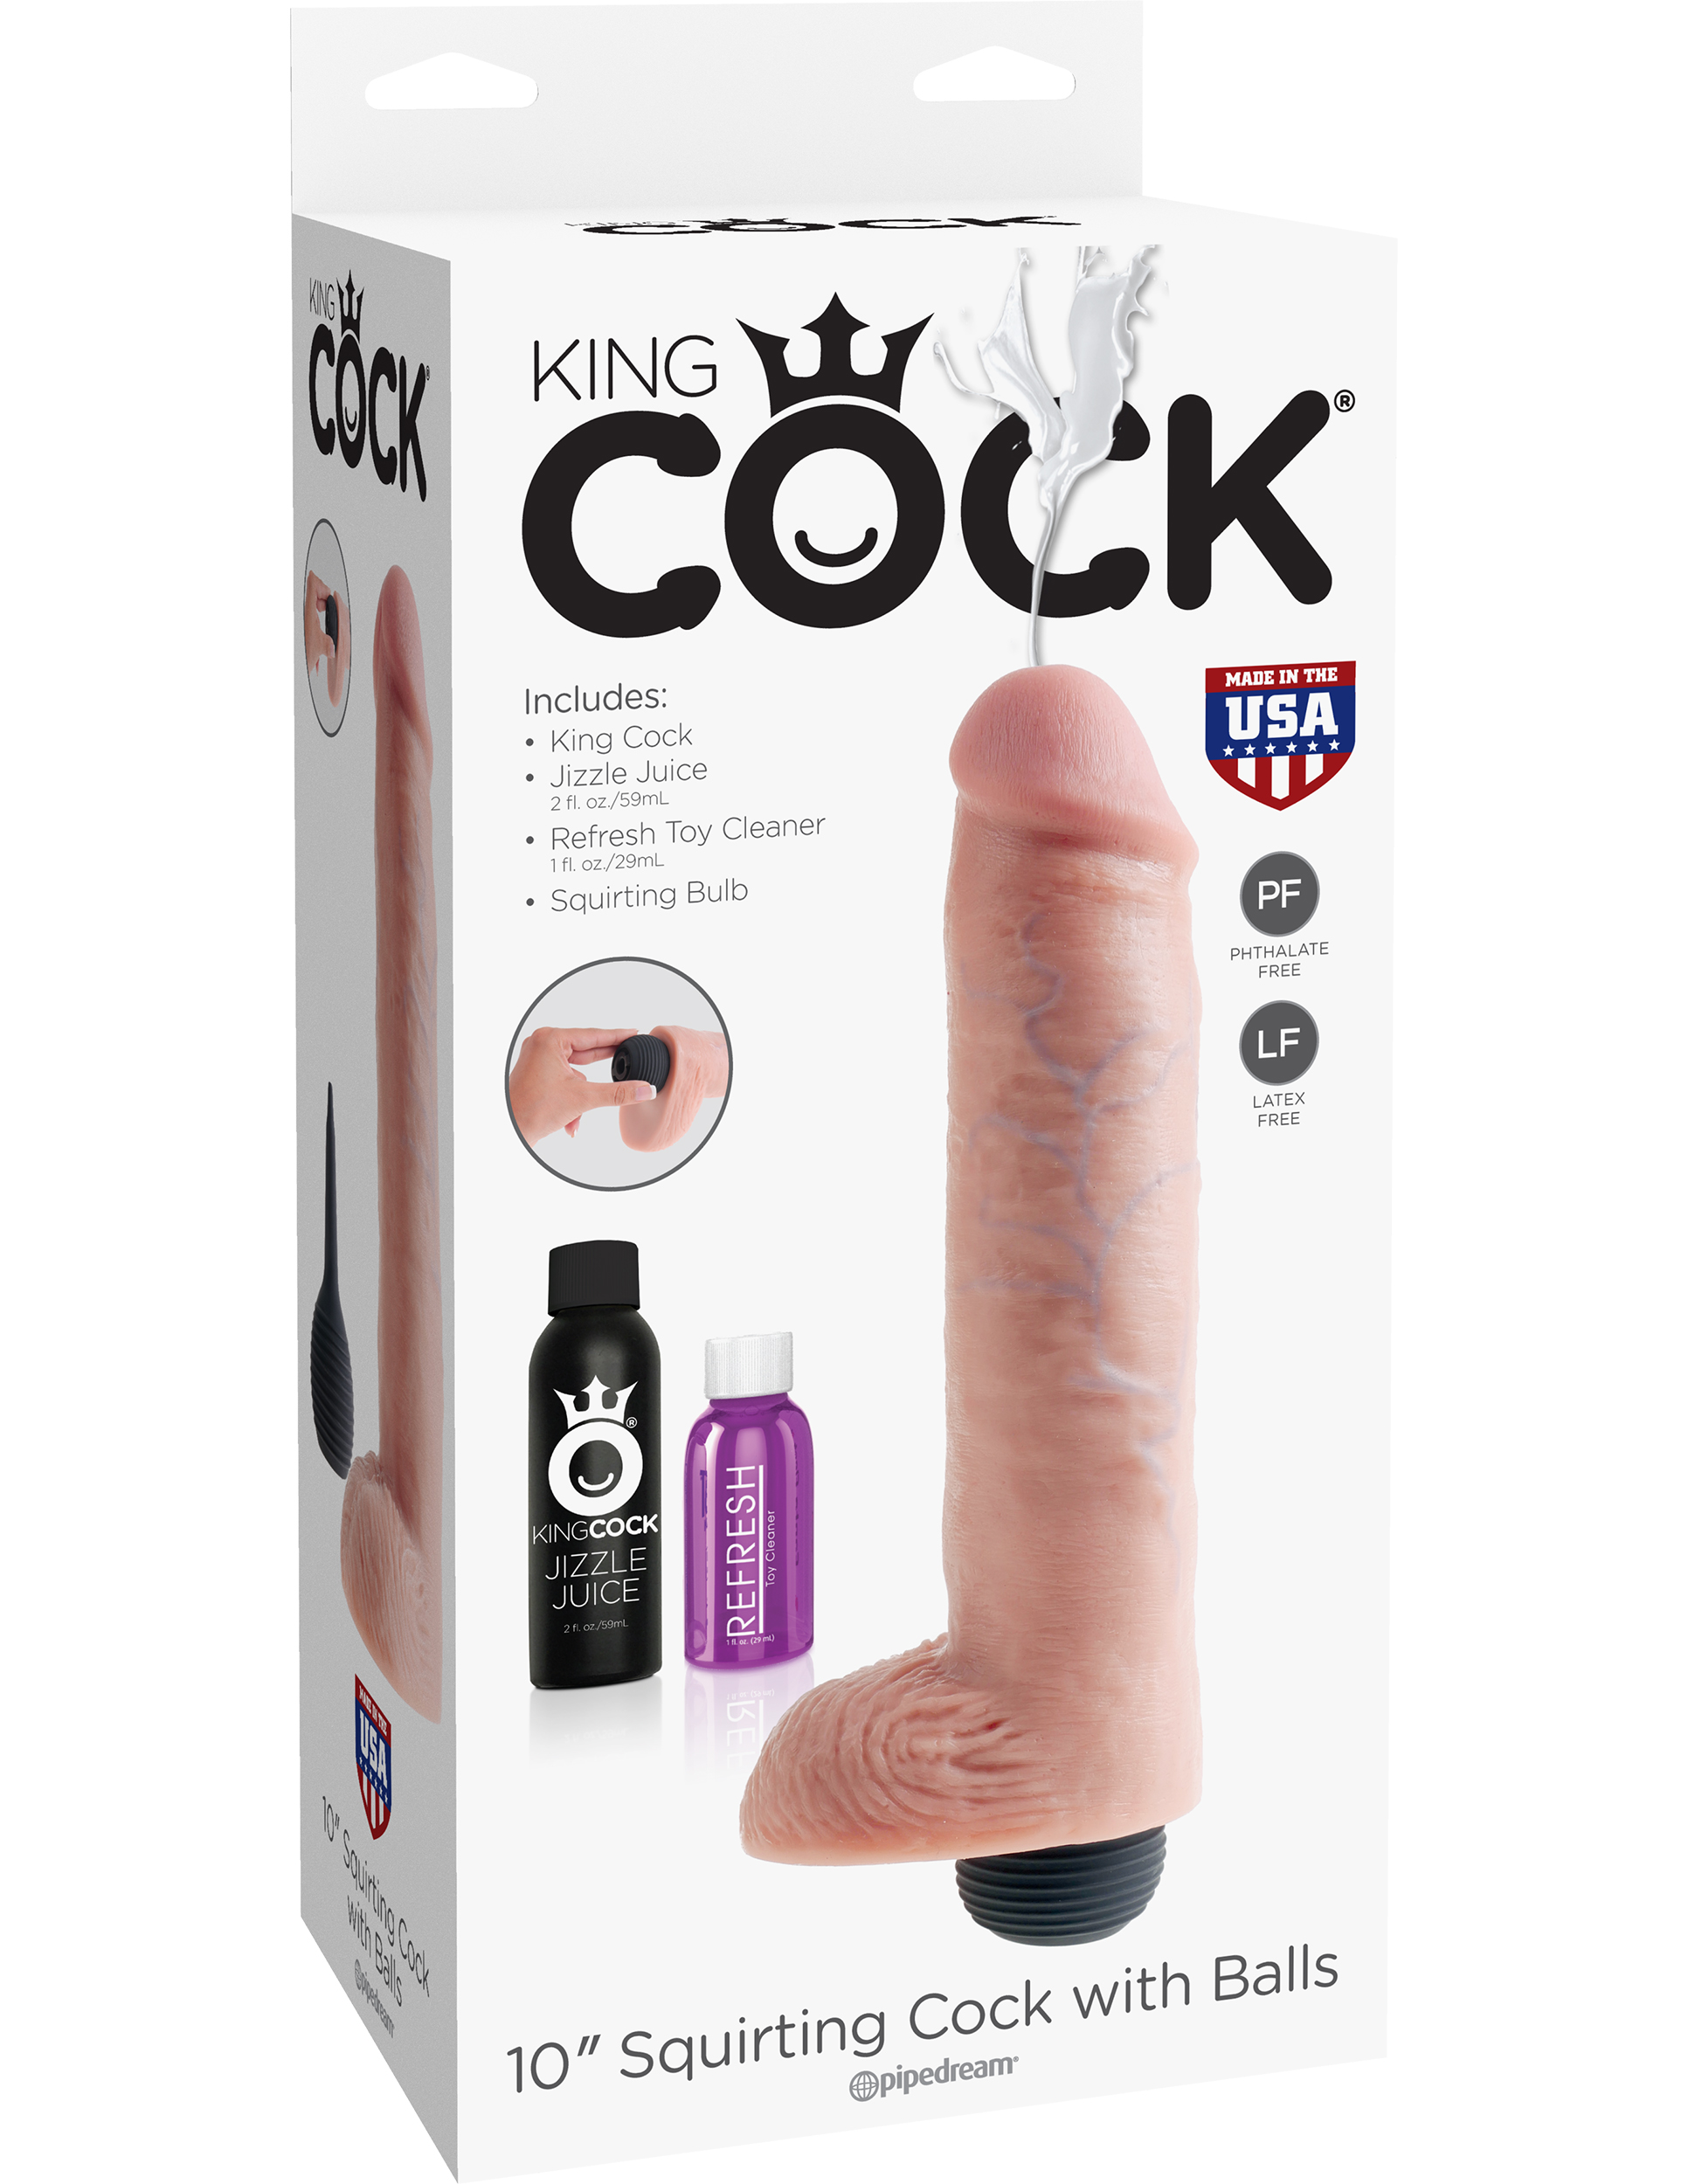 10 squirting king cock